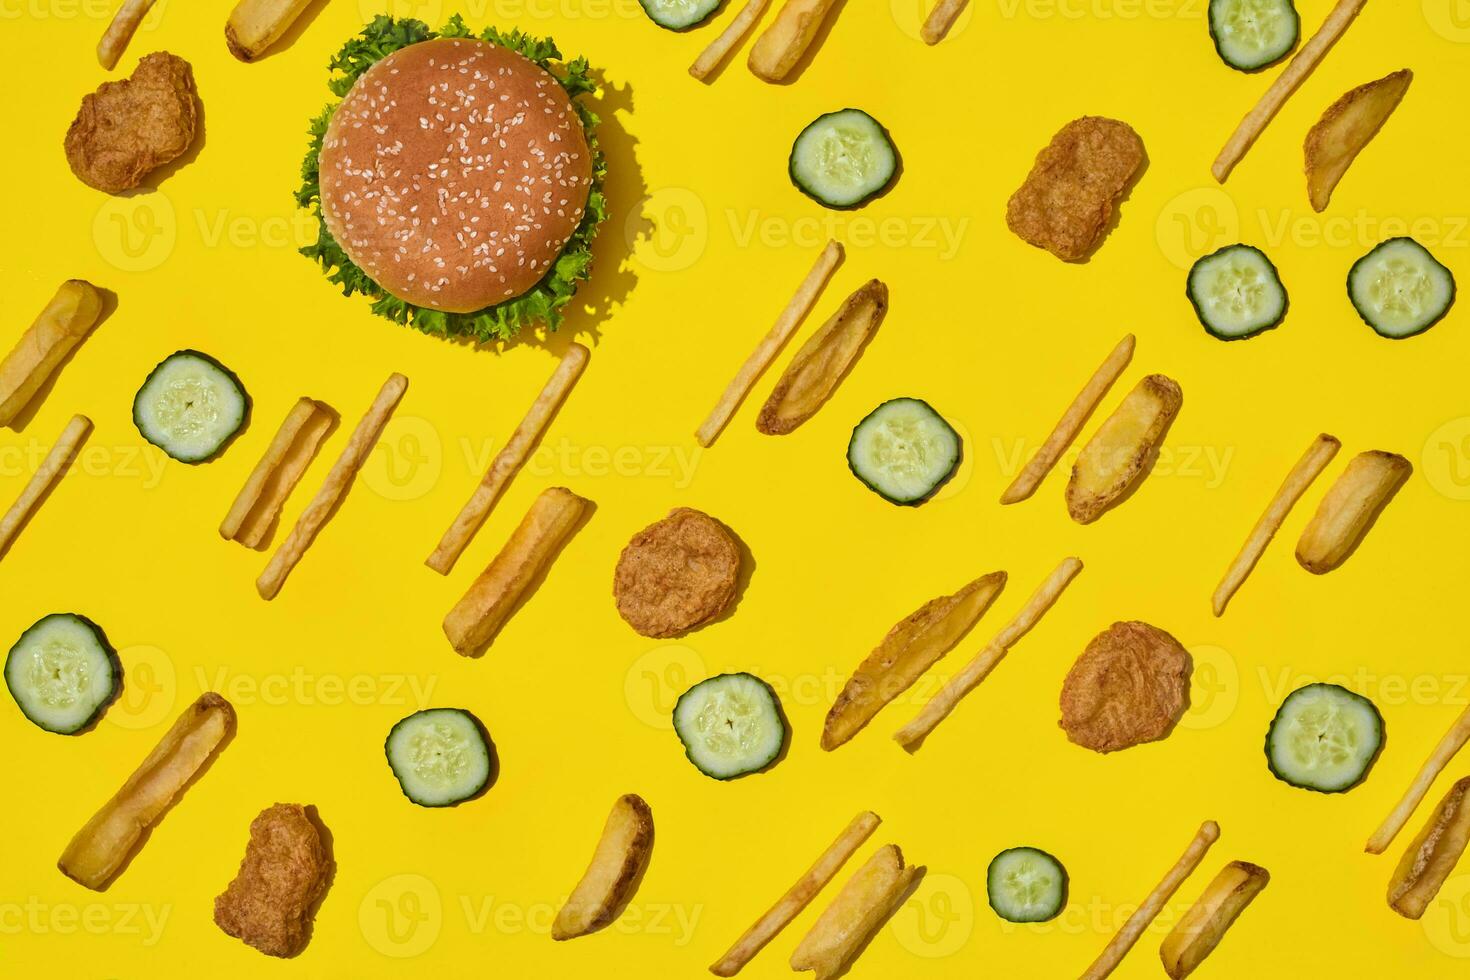 Most popular fast food meal. Chicken nuggets, burger and french fries on yellow background top view photo